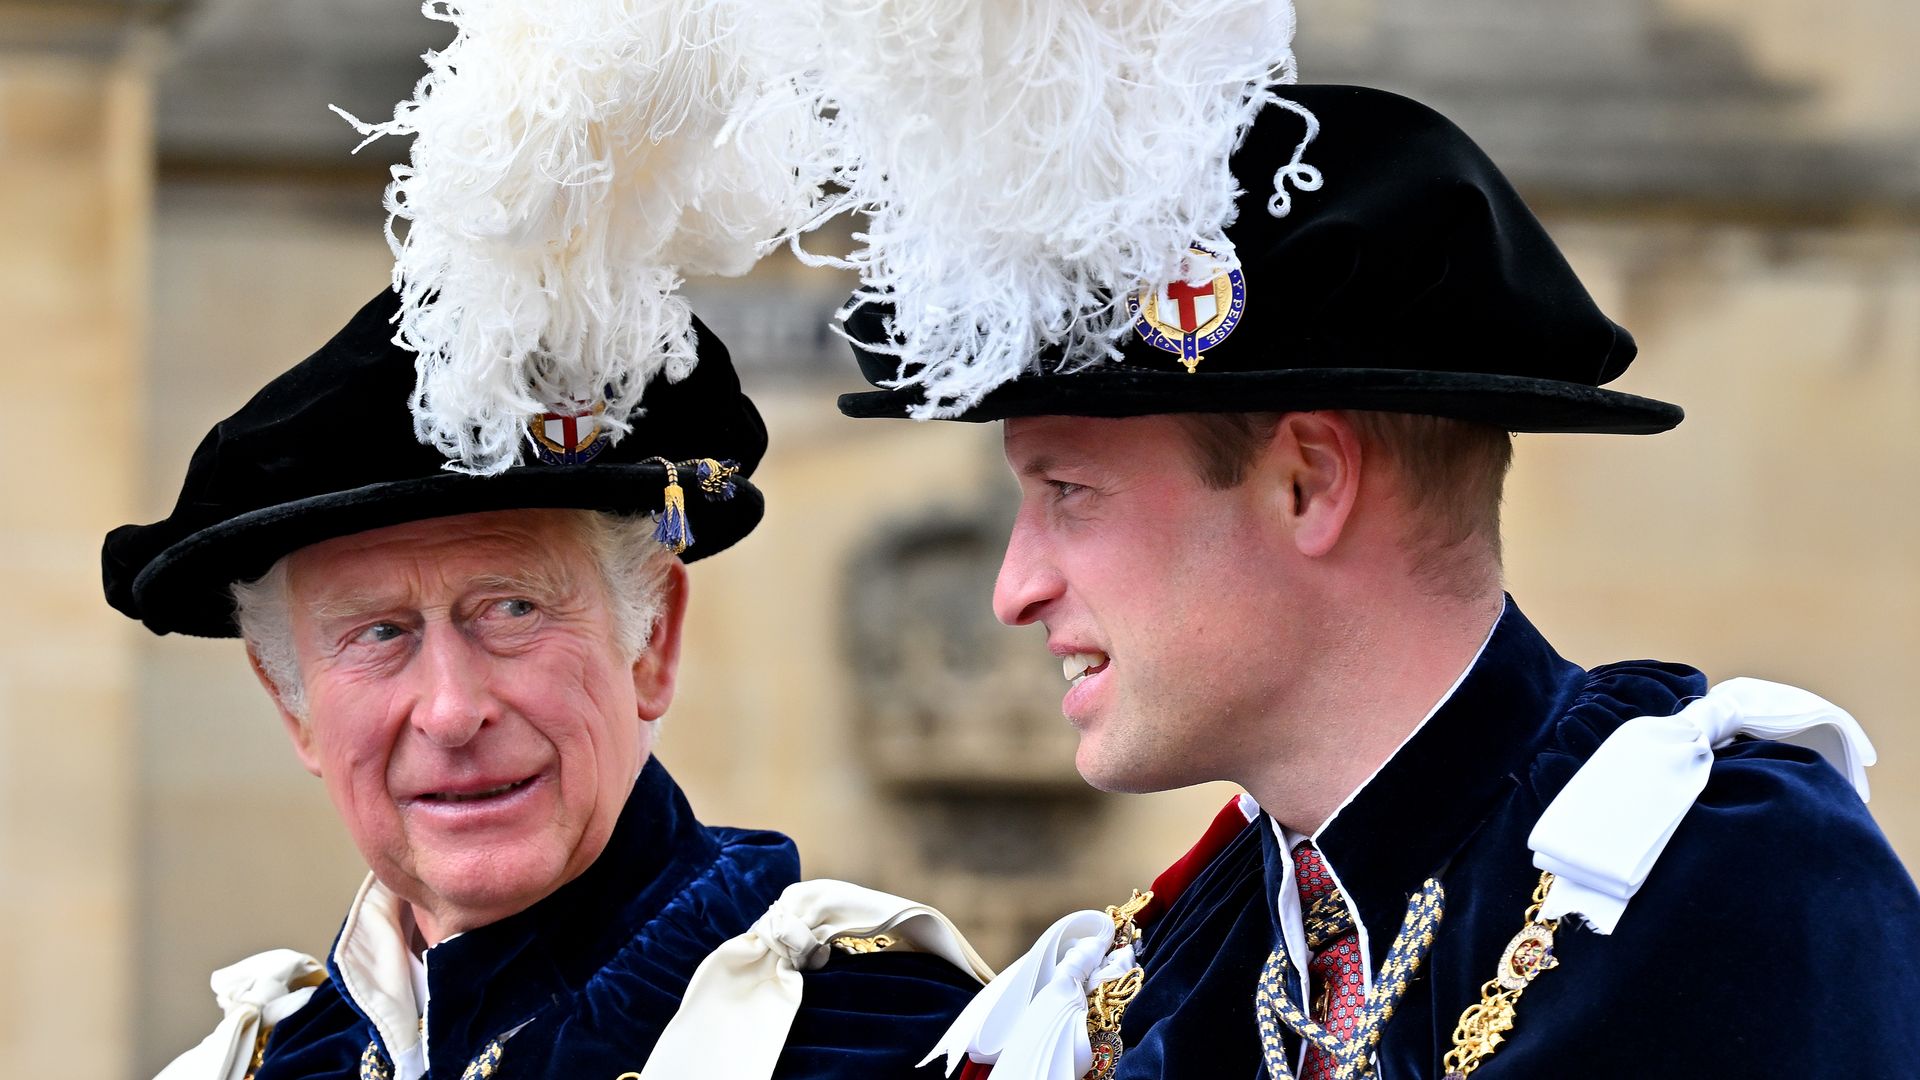 King Charles and Prince William smiling together in feathery hats